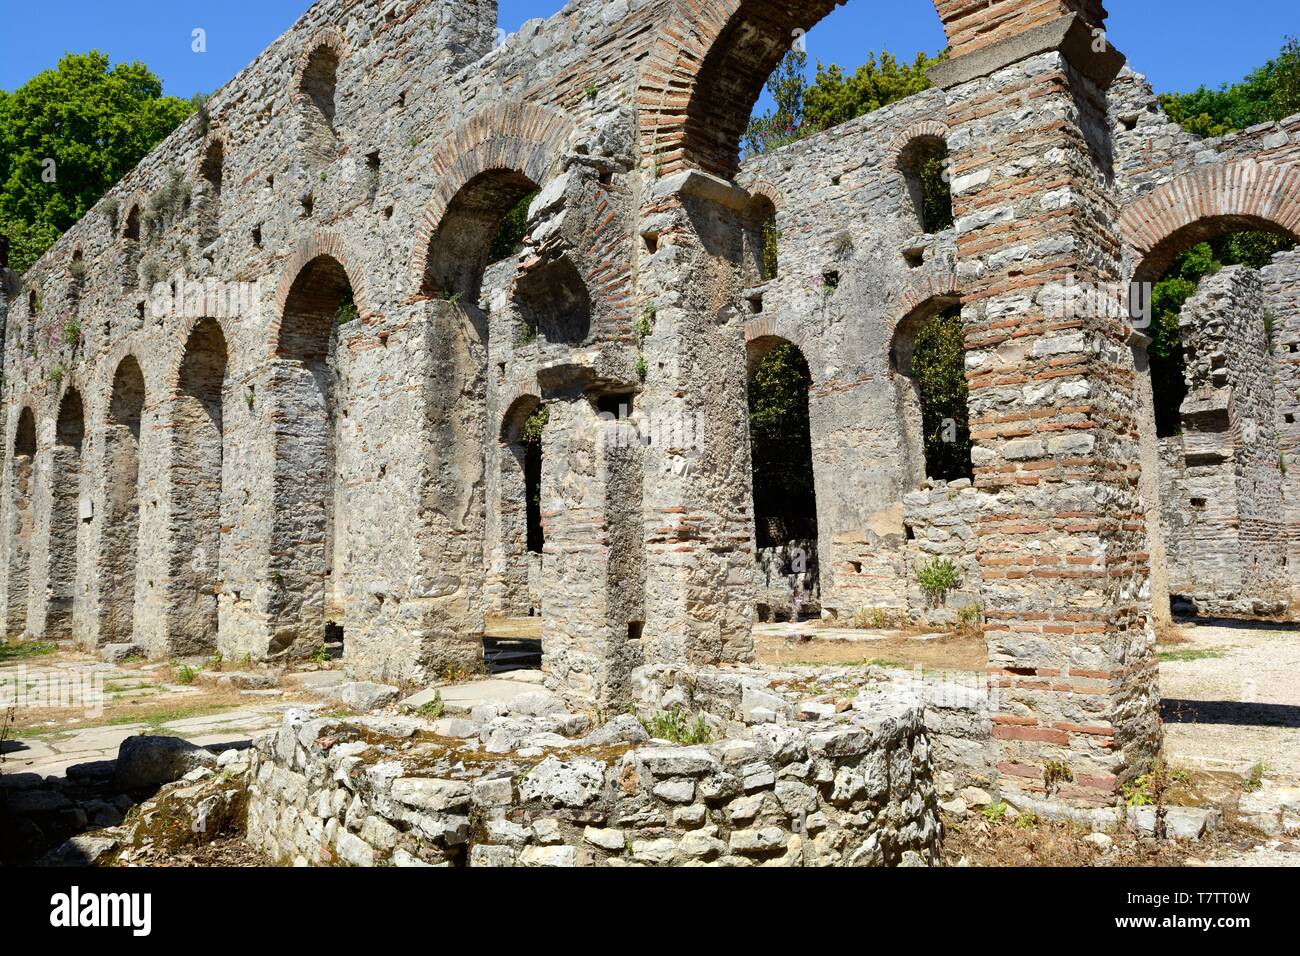 The Basilica Butrint one of the most important archaeological sites in the Balcans Unesco World Heritage Site Albania Stock Photo